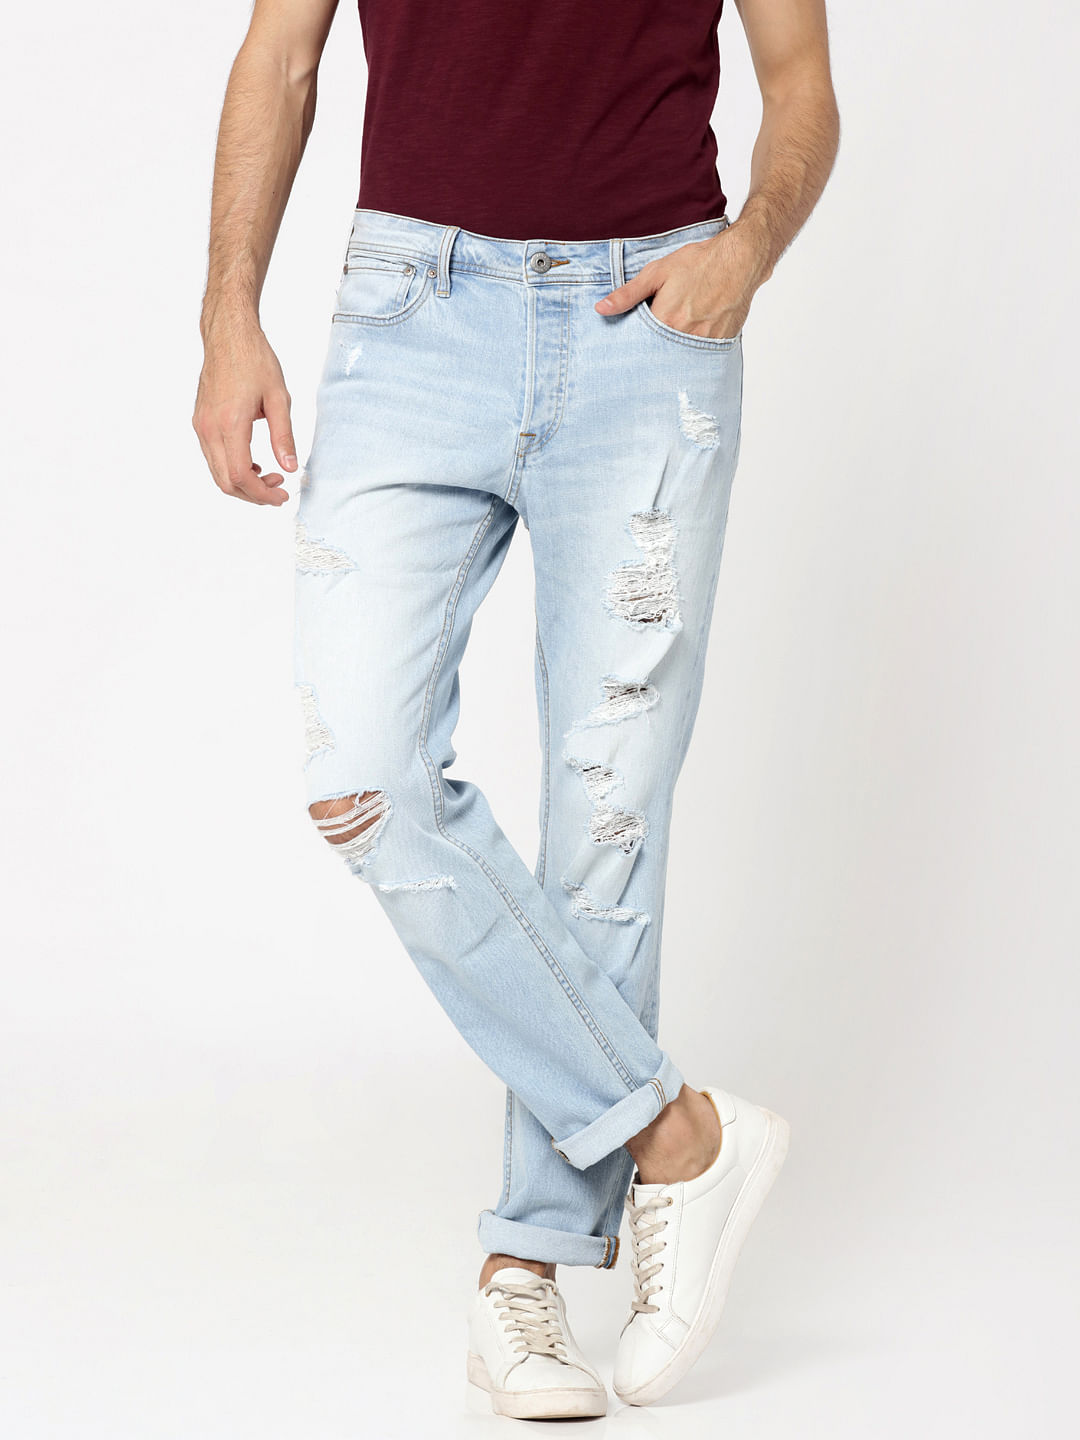 mens heavy ripped jeans